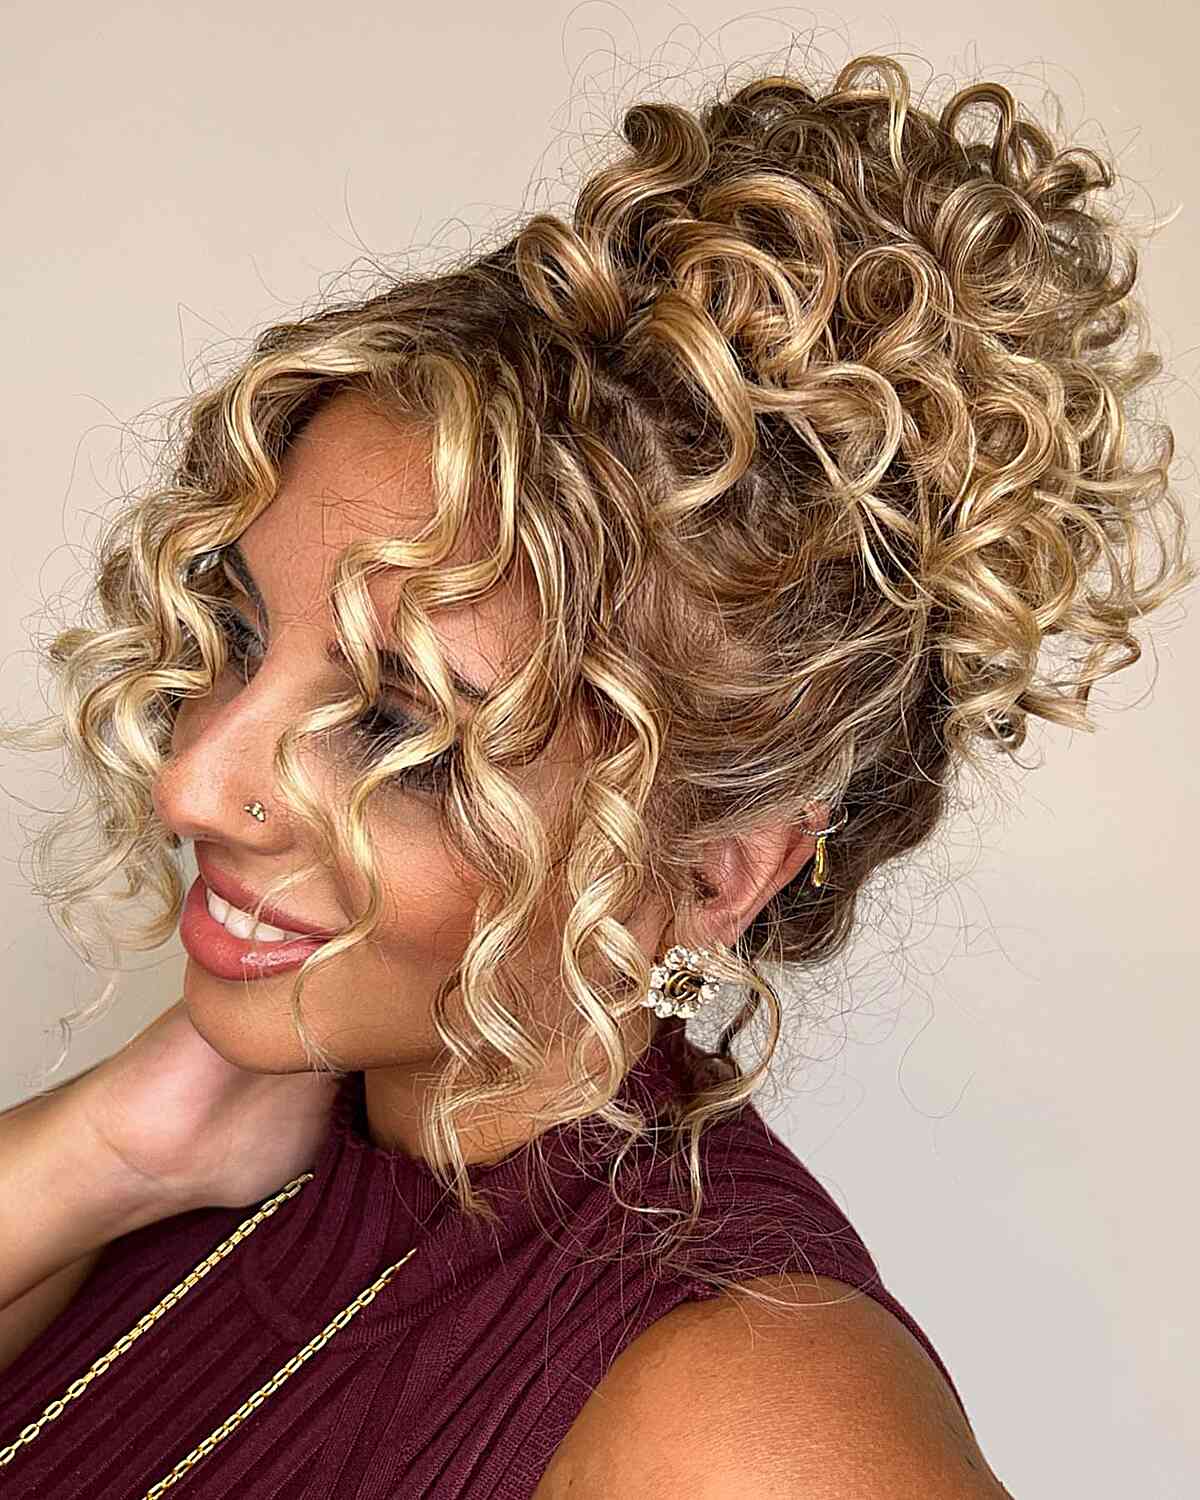 15 Side-Parted Curly Hairstyles to Spice Up The Look – HairstyleCamp